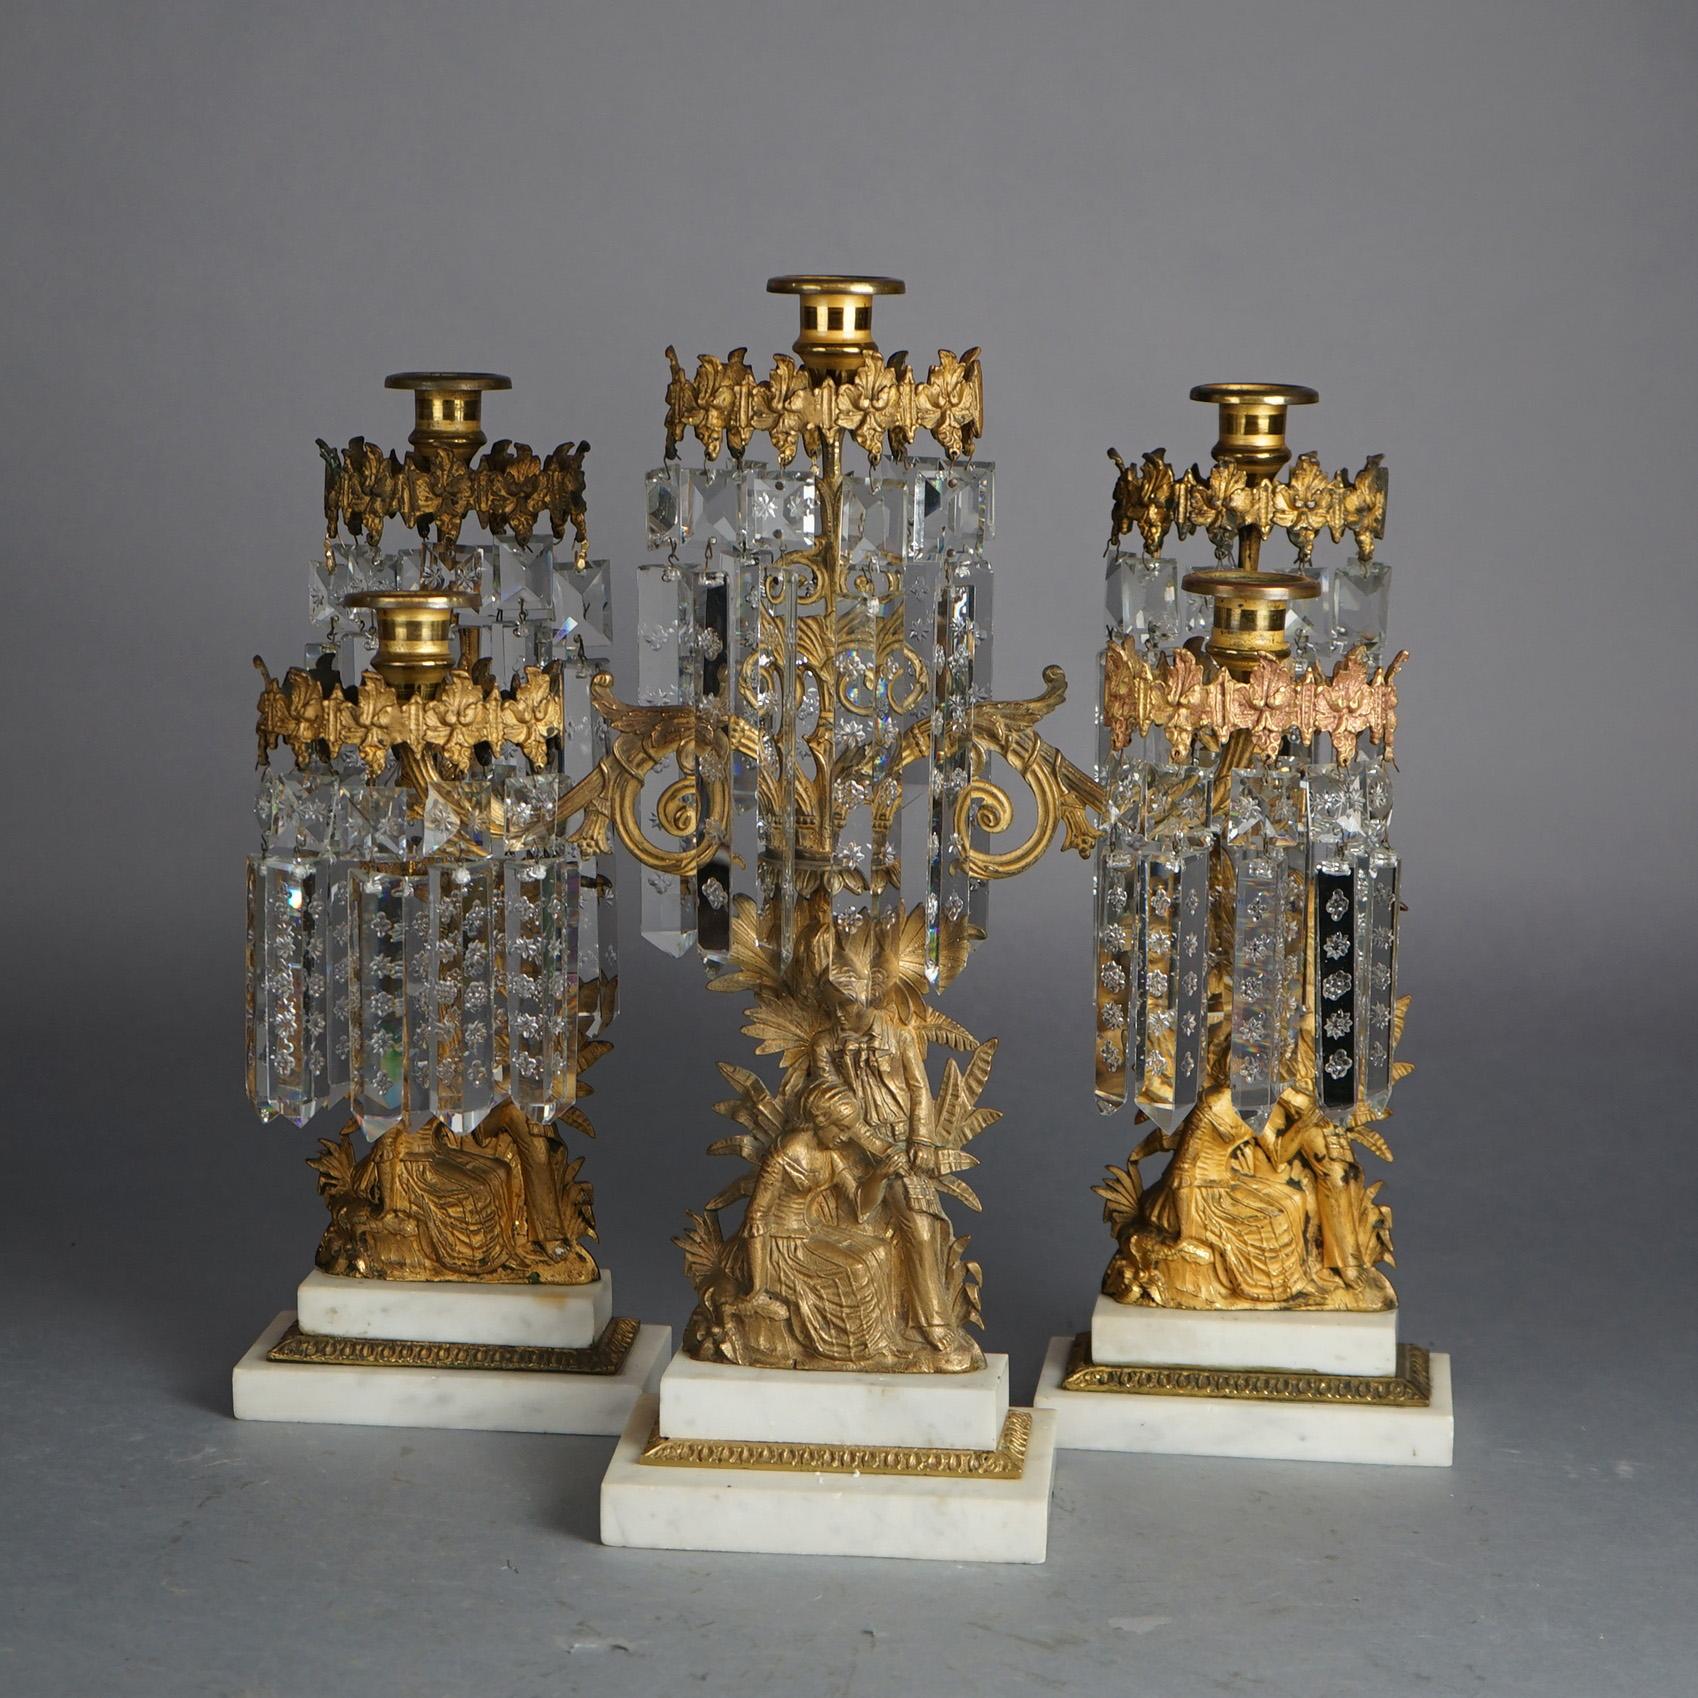 Victorian Antique Gilt Bronze American Girandole Candelabras with Marble & Crystals C1880 For Sale